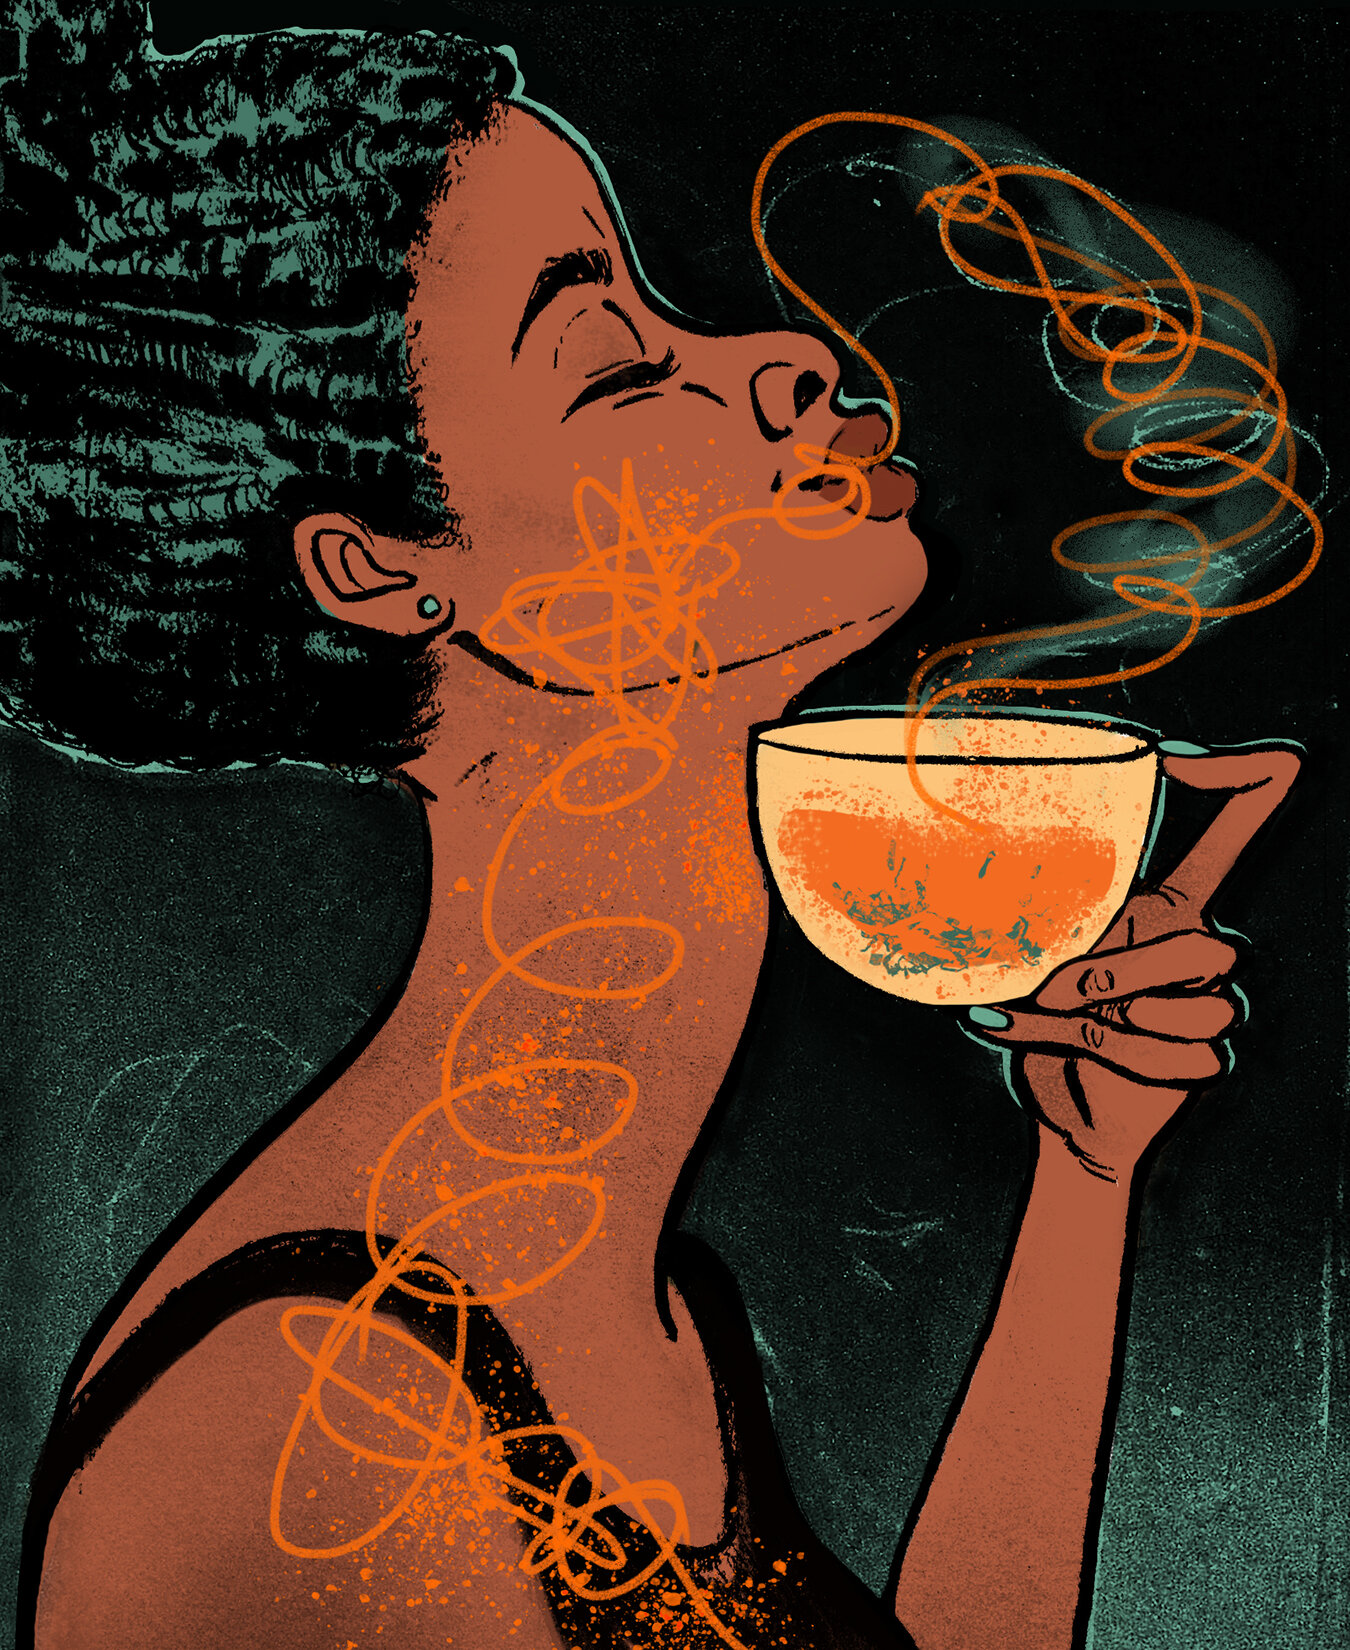   Print available on    Inprnt   .   Imbibe Magazine - November/December 2018  Spot Illustration:  What drinking tea can teach you    AD: Molly Henty 